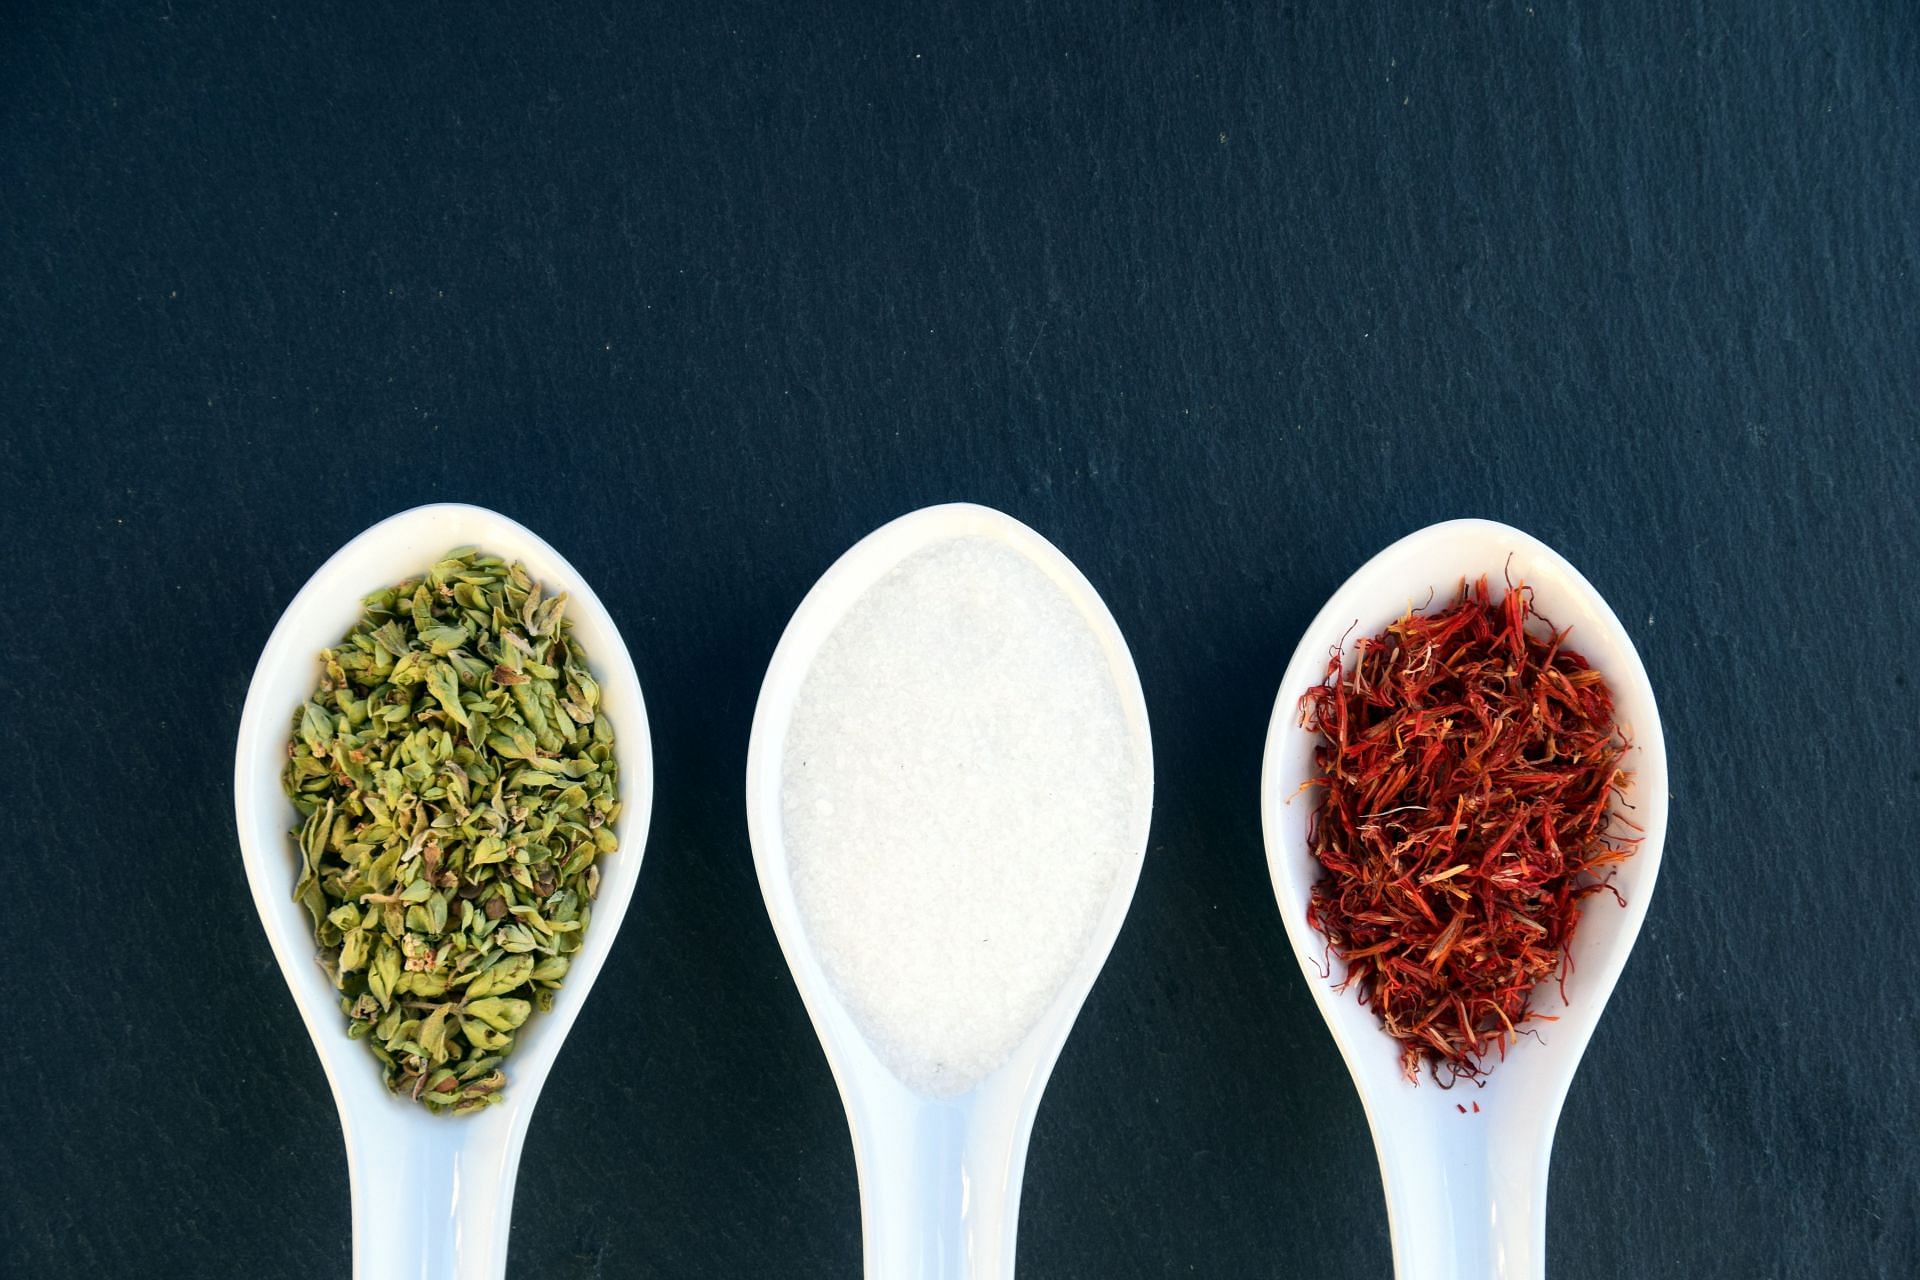 Herbs add spice to our food and brain health.  (Image via Pexels/Pixabay)